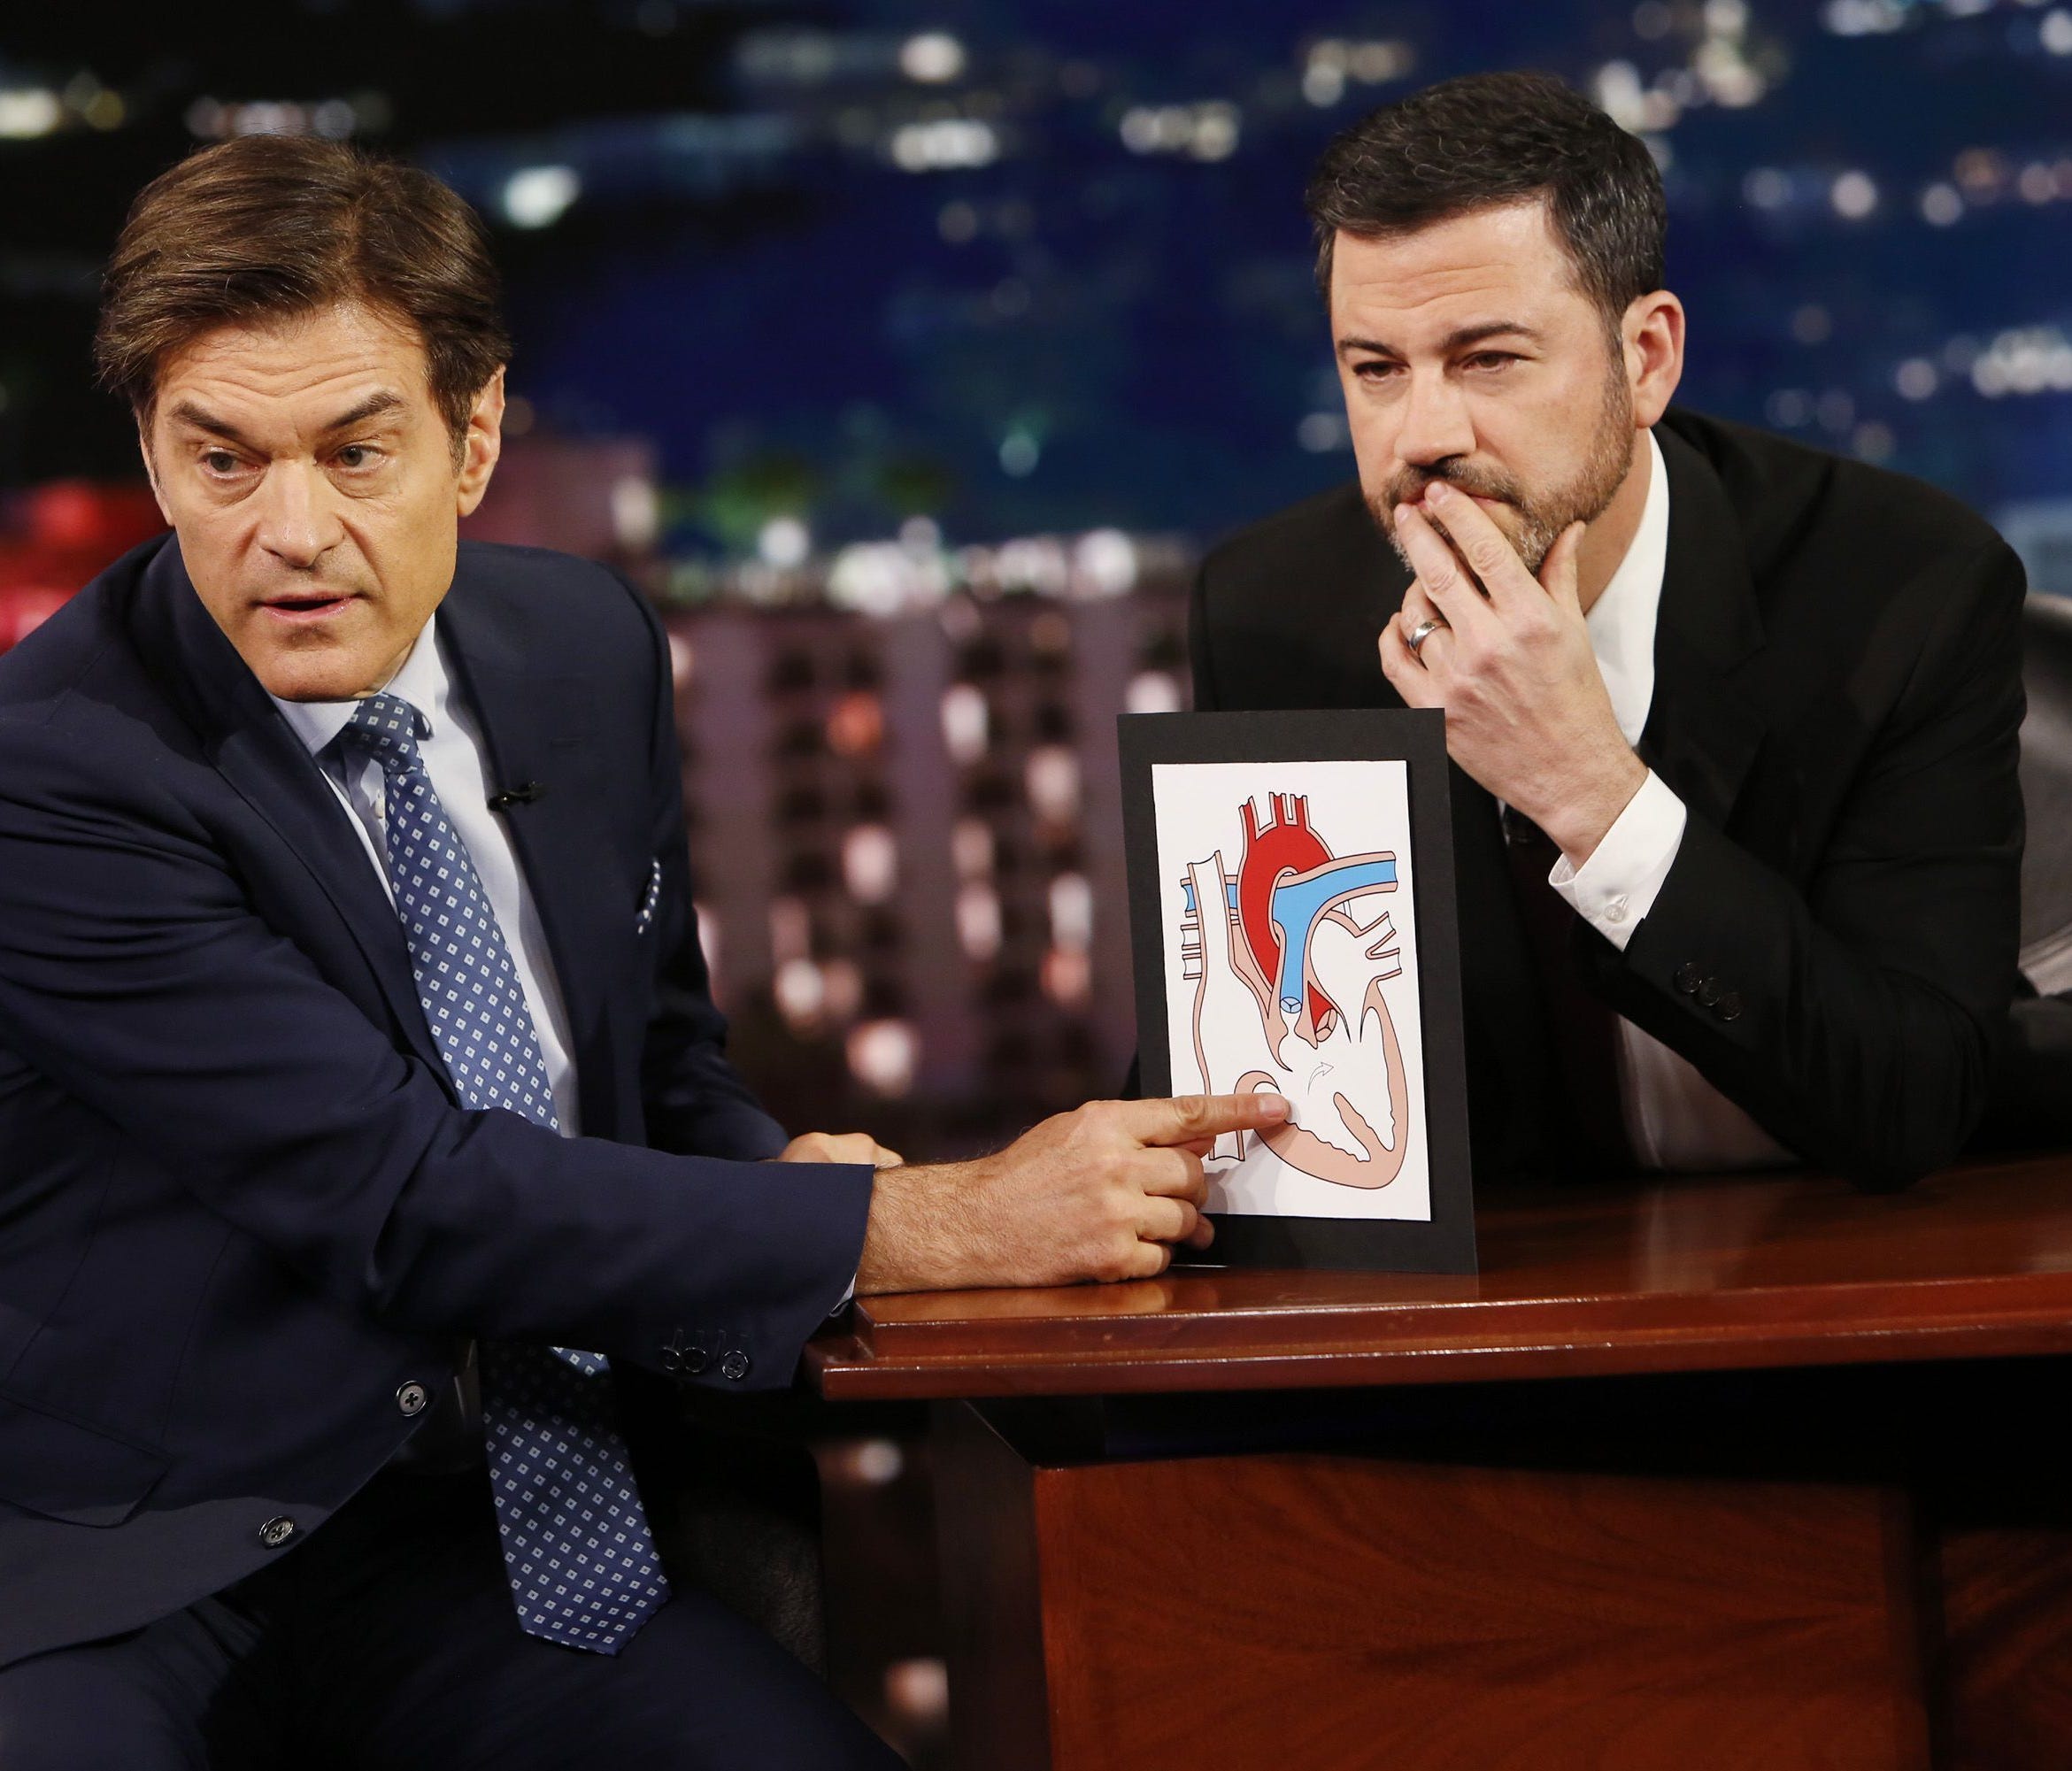 Mehmet Oz, aka TV's 'Dr. Oz,' who specialized in cardiothoracic surgery, gives Jimmy Kimmel's audience a primer on how the heart works.